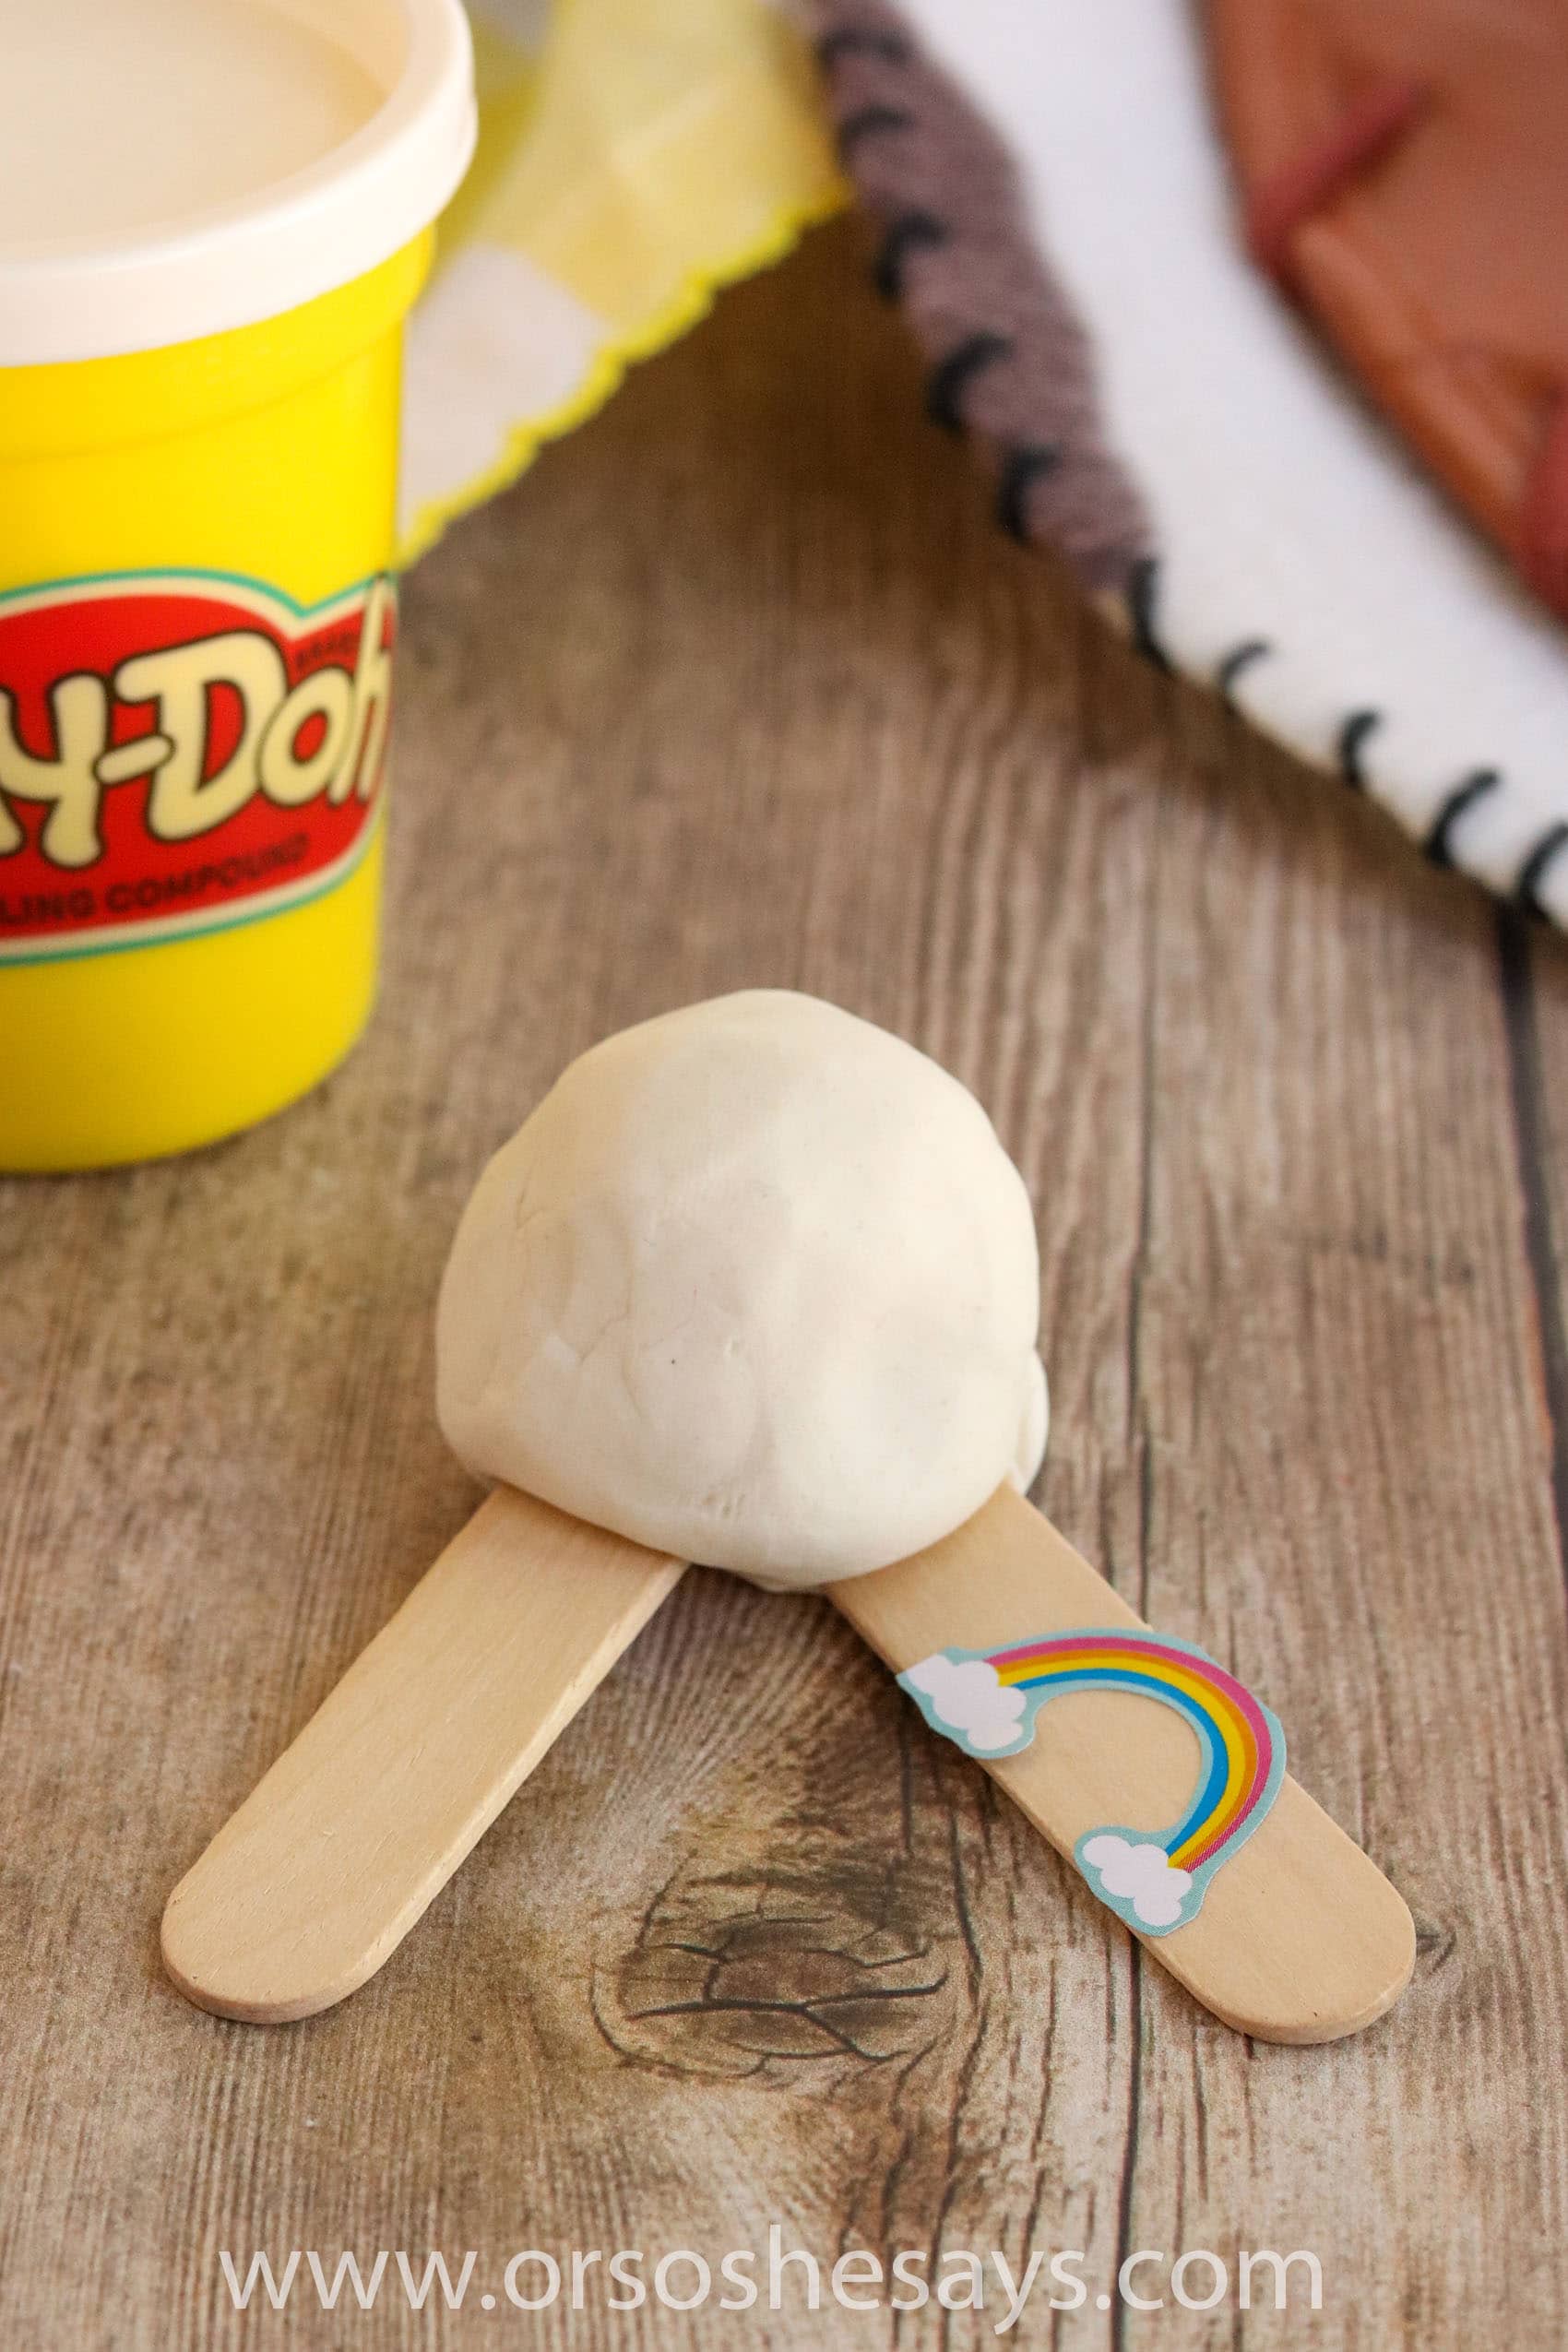 This DIY Forky from Toy Story 4 is so adorable! Perfect for a Toy Story birthday party activity or to make on a summer day. #toystory #toystory4 #forky #disney #disneyland